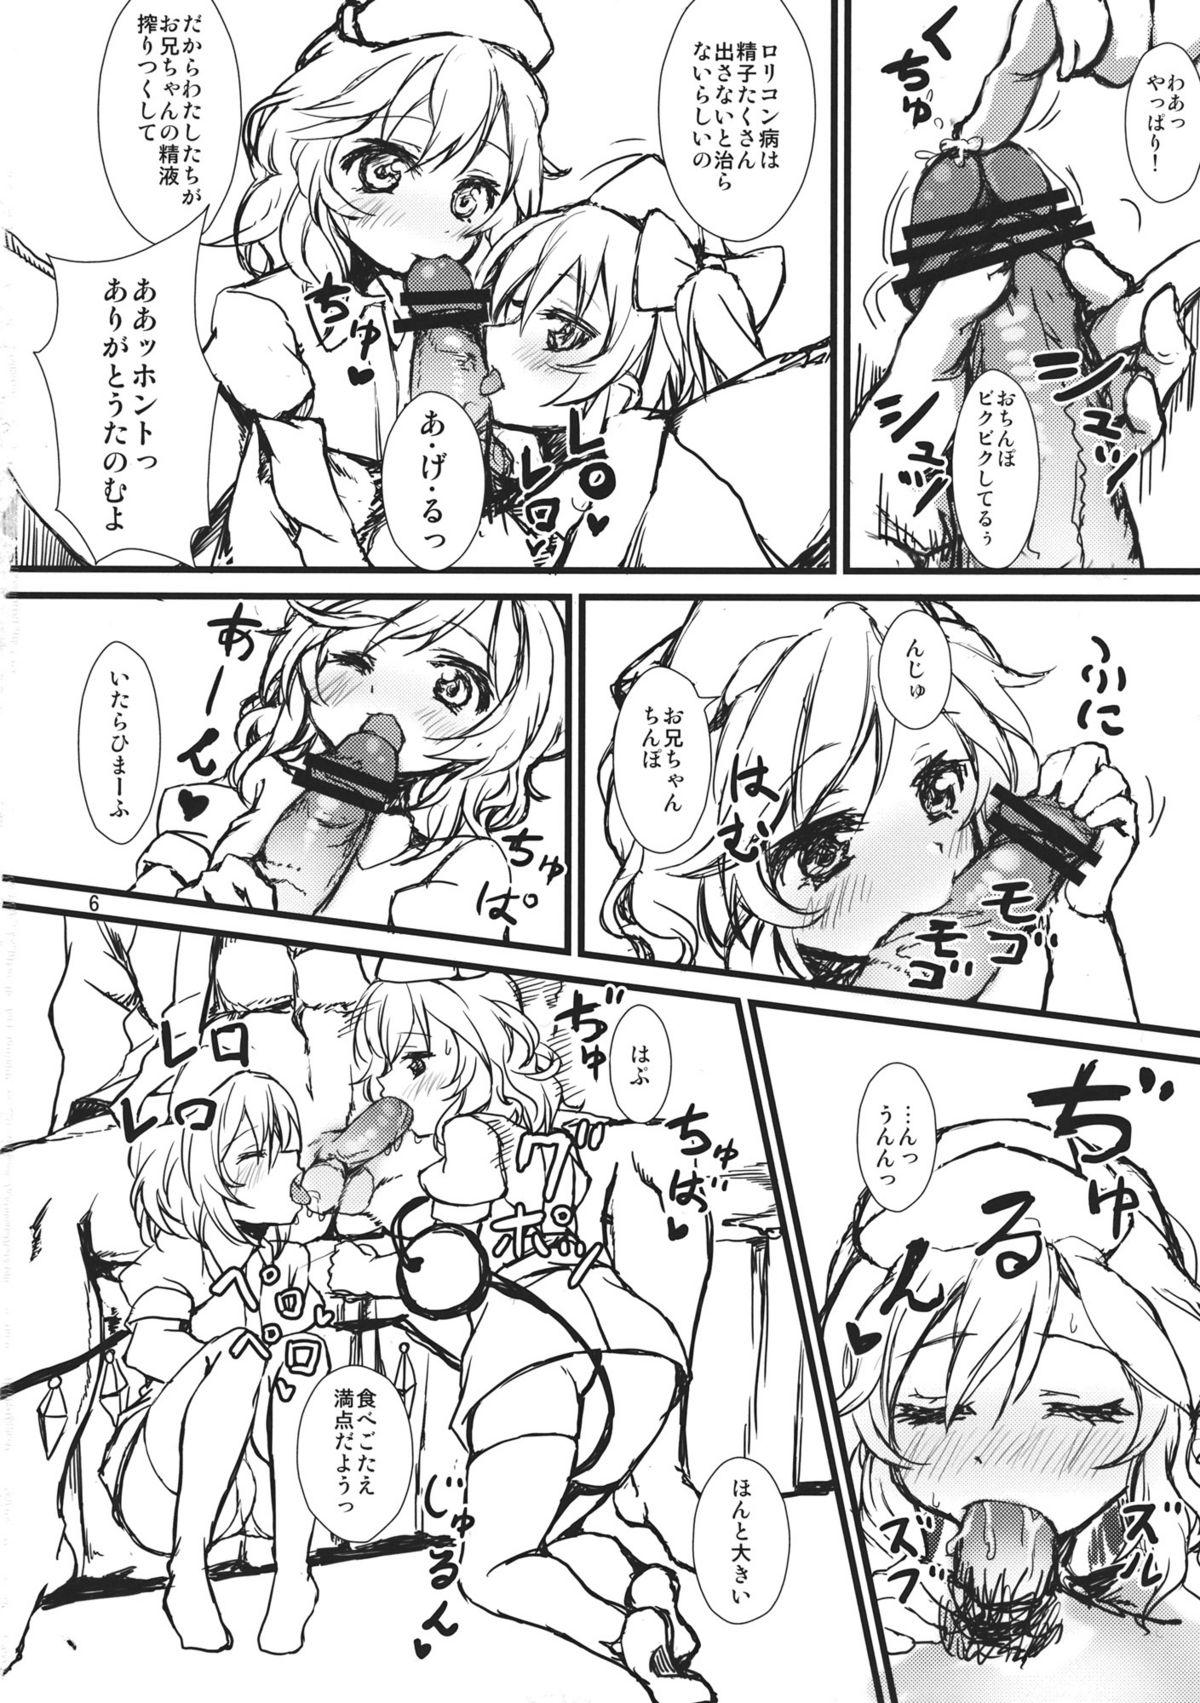 Vietnamese Toy Destroyer - Touhou project Lovers - Page 6